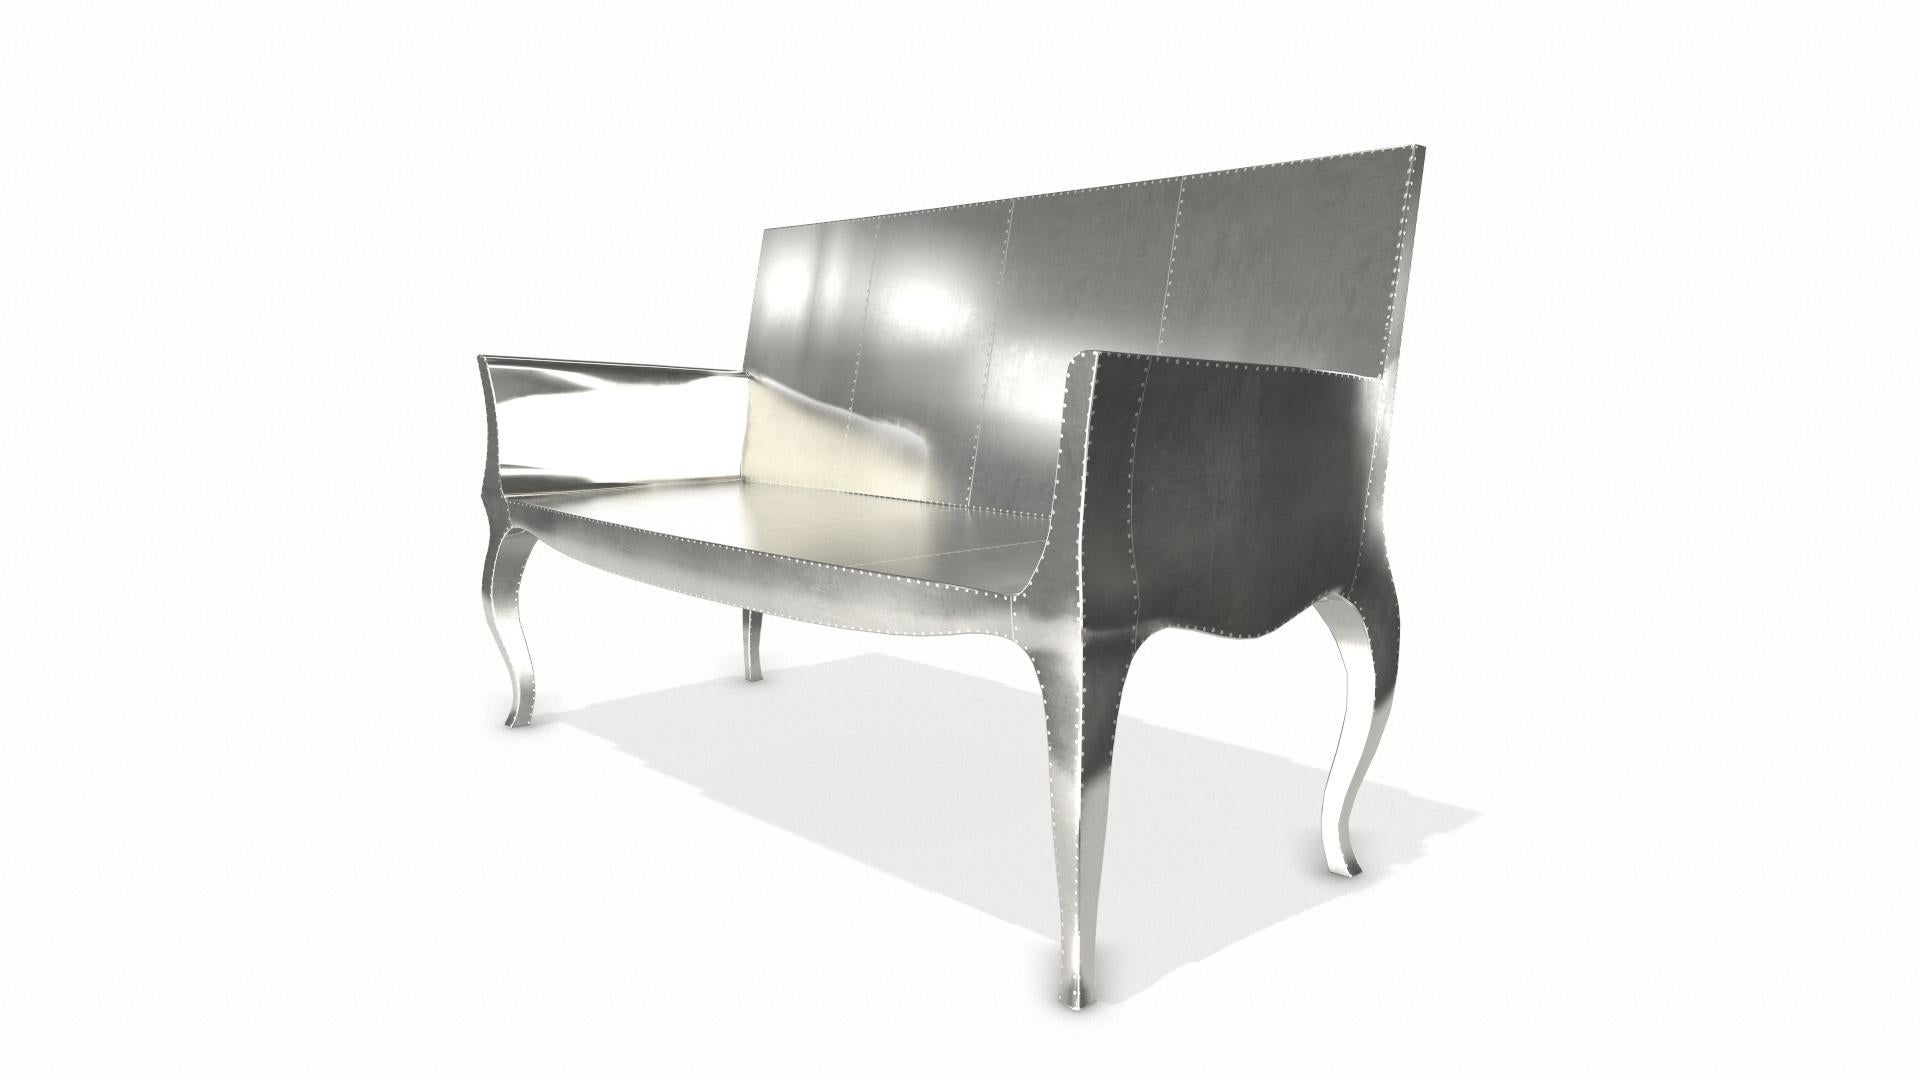 Hand-Crafted Louise Settee Art Deco Benches in Smooth White Bronze by Paul Mathieu For Sale